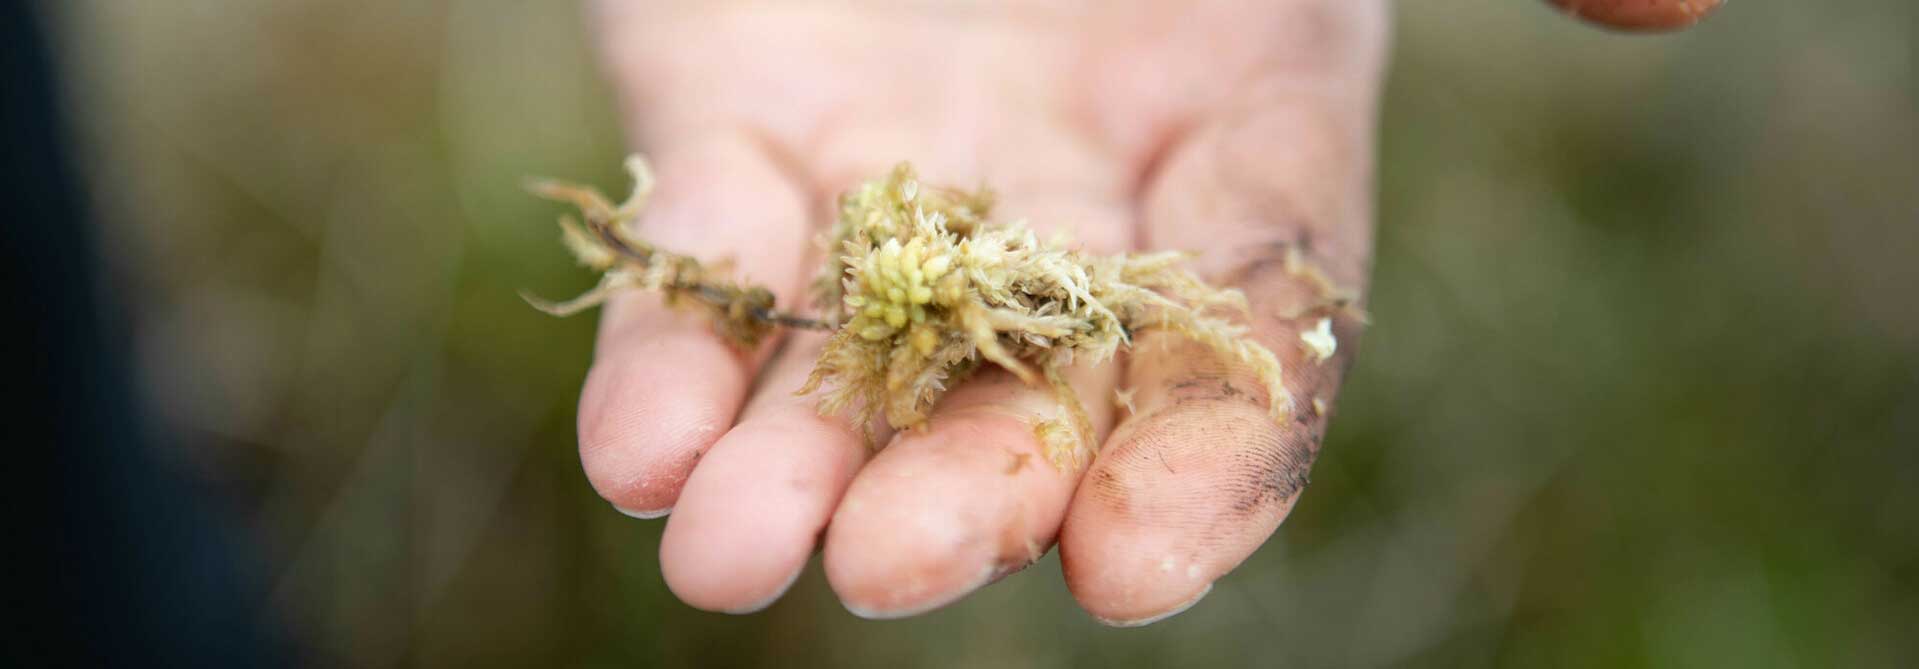 Close up of hand holding a sphagnum moss. Credit Charlie Fox.